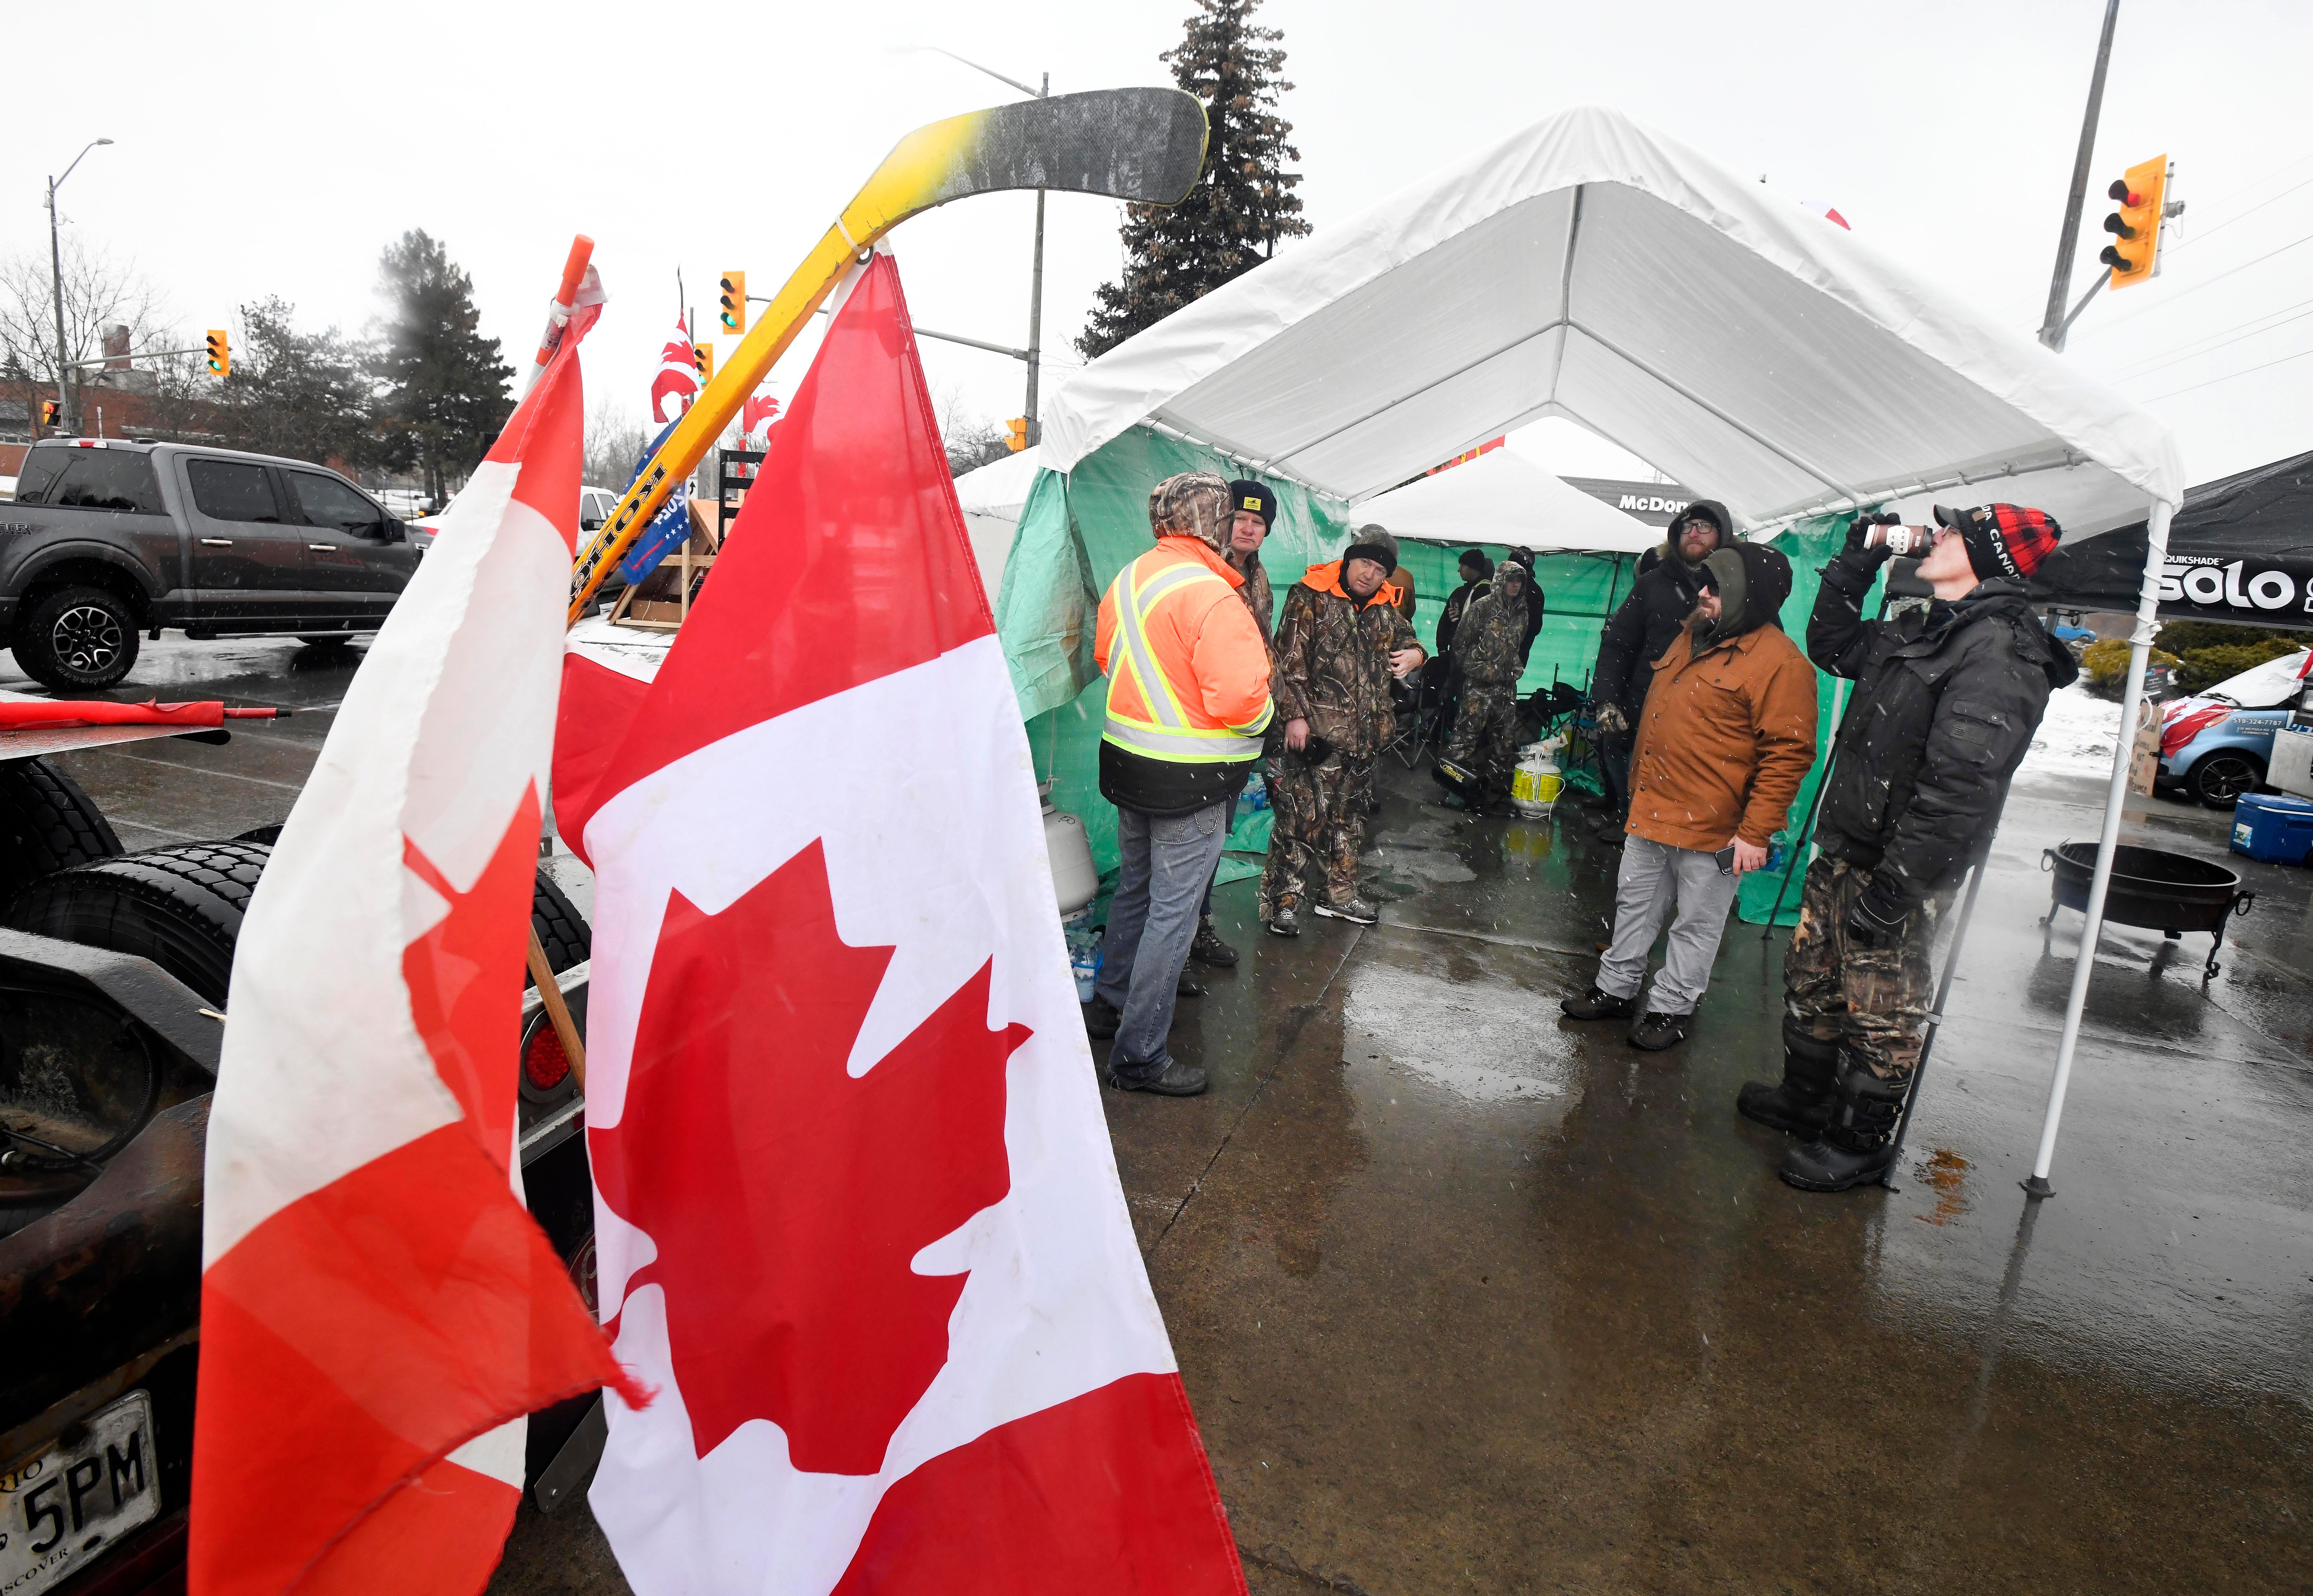 Protestors take shelter from the cold weather with Canadian flags on hockey sticks throughout the camp.  Canadian truckers protests against COVID measures on corner of Huron Church Road and Tecumseh, with the Ambassador Bridge in the background, in Windsor, Canada on February 11, 2022.